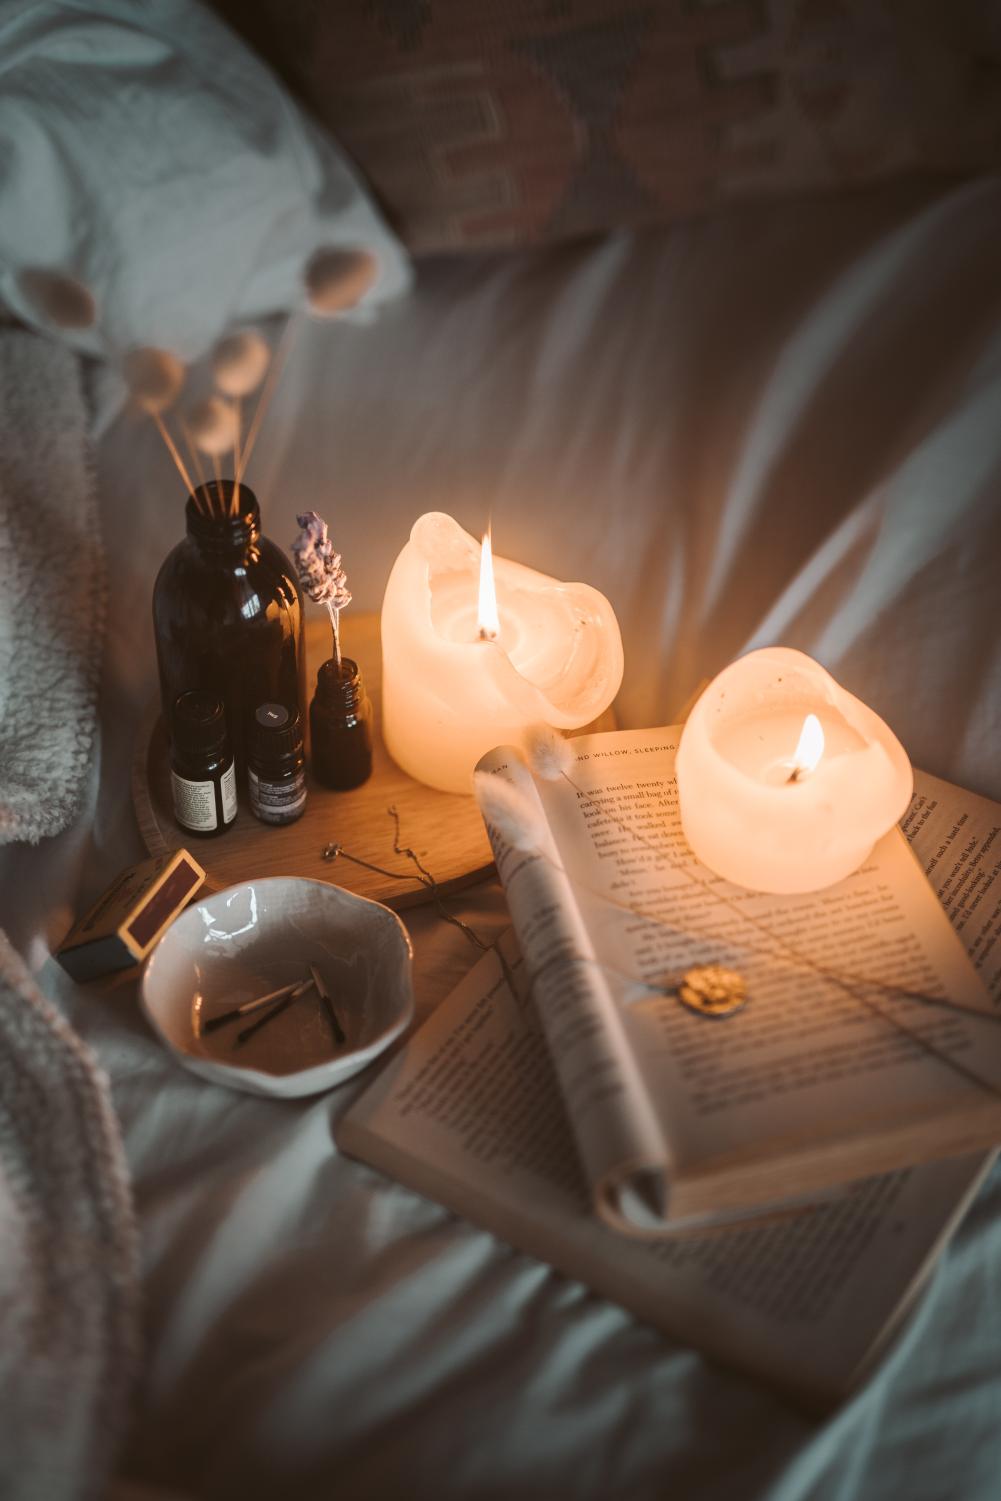 Hygge Means Comfort And More : The Salt : NPR